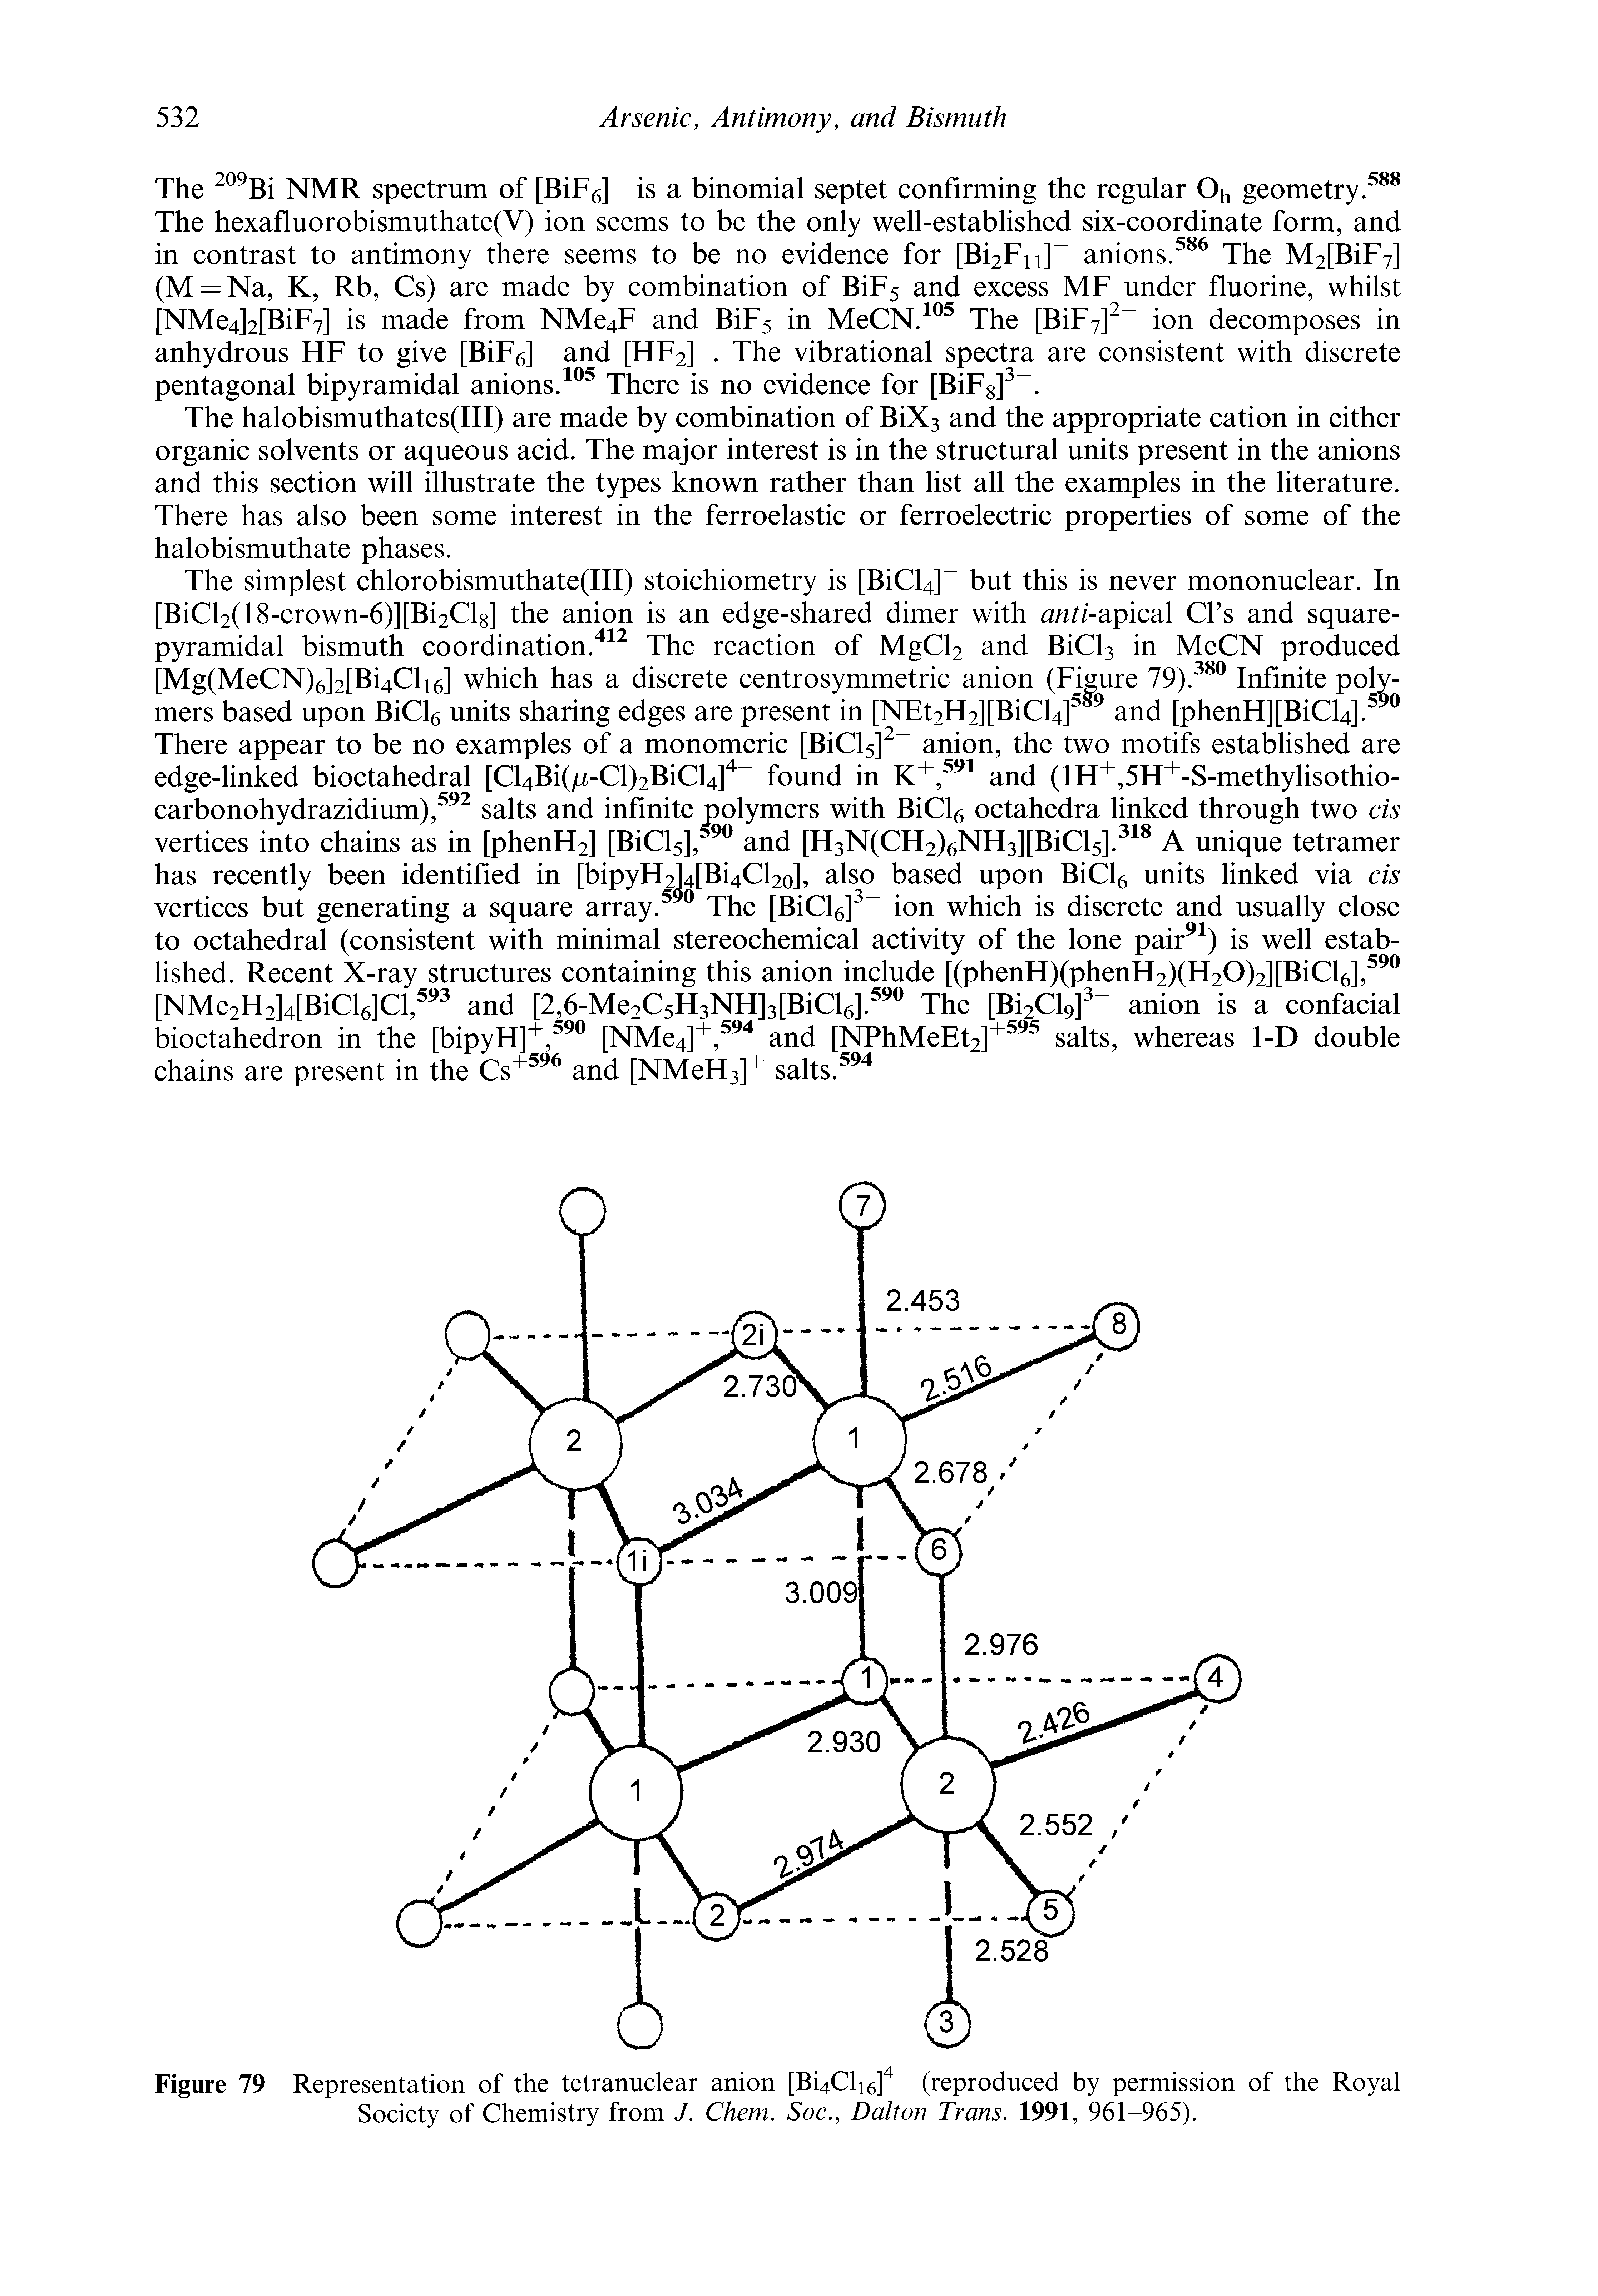 Figure 79 Representation of the tetranuclear anion [Bi4Cli6]" (reproduced by permission of the Royal Society of Chemistry from J. Chem. Soc., Dalton Trans. 1991, 961-965).